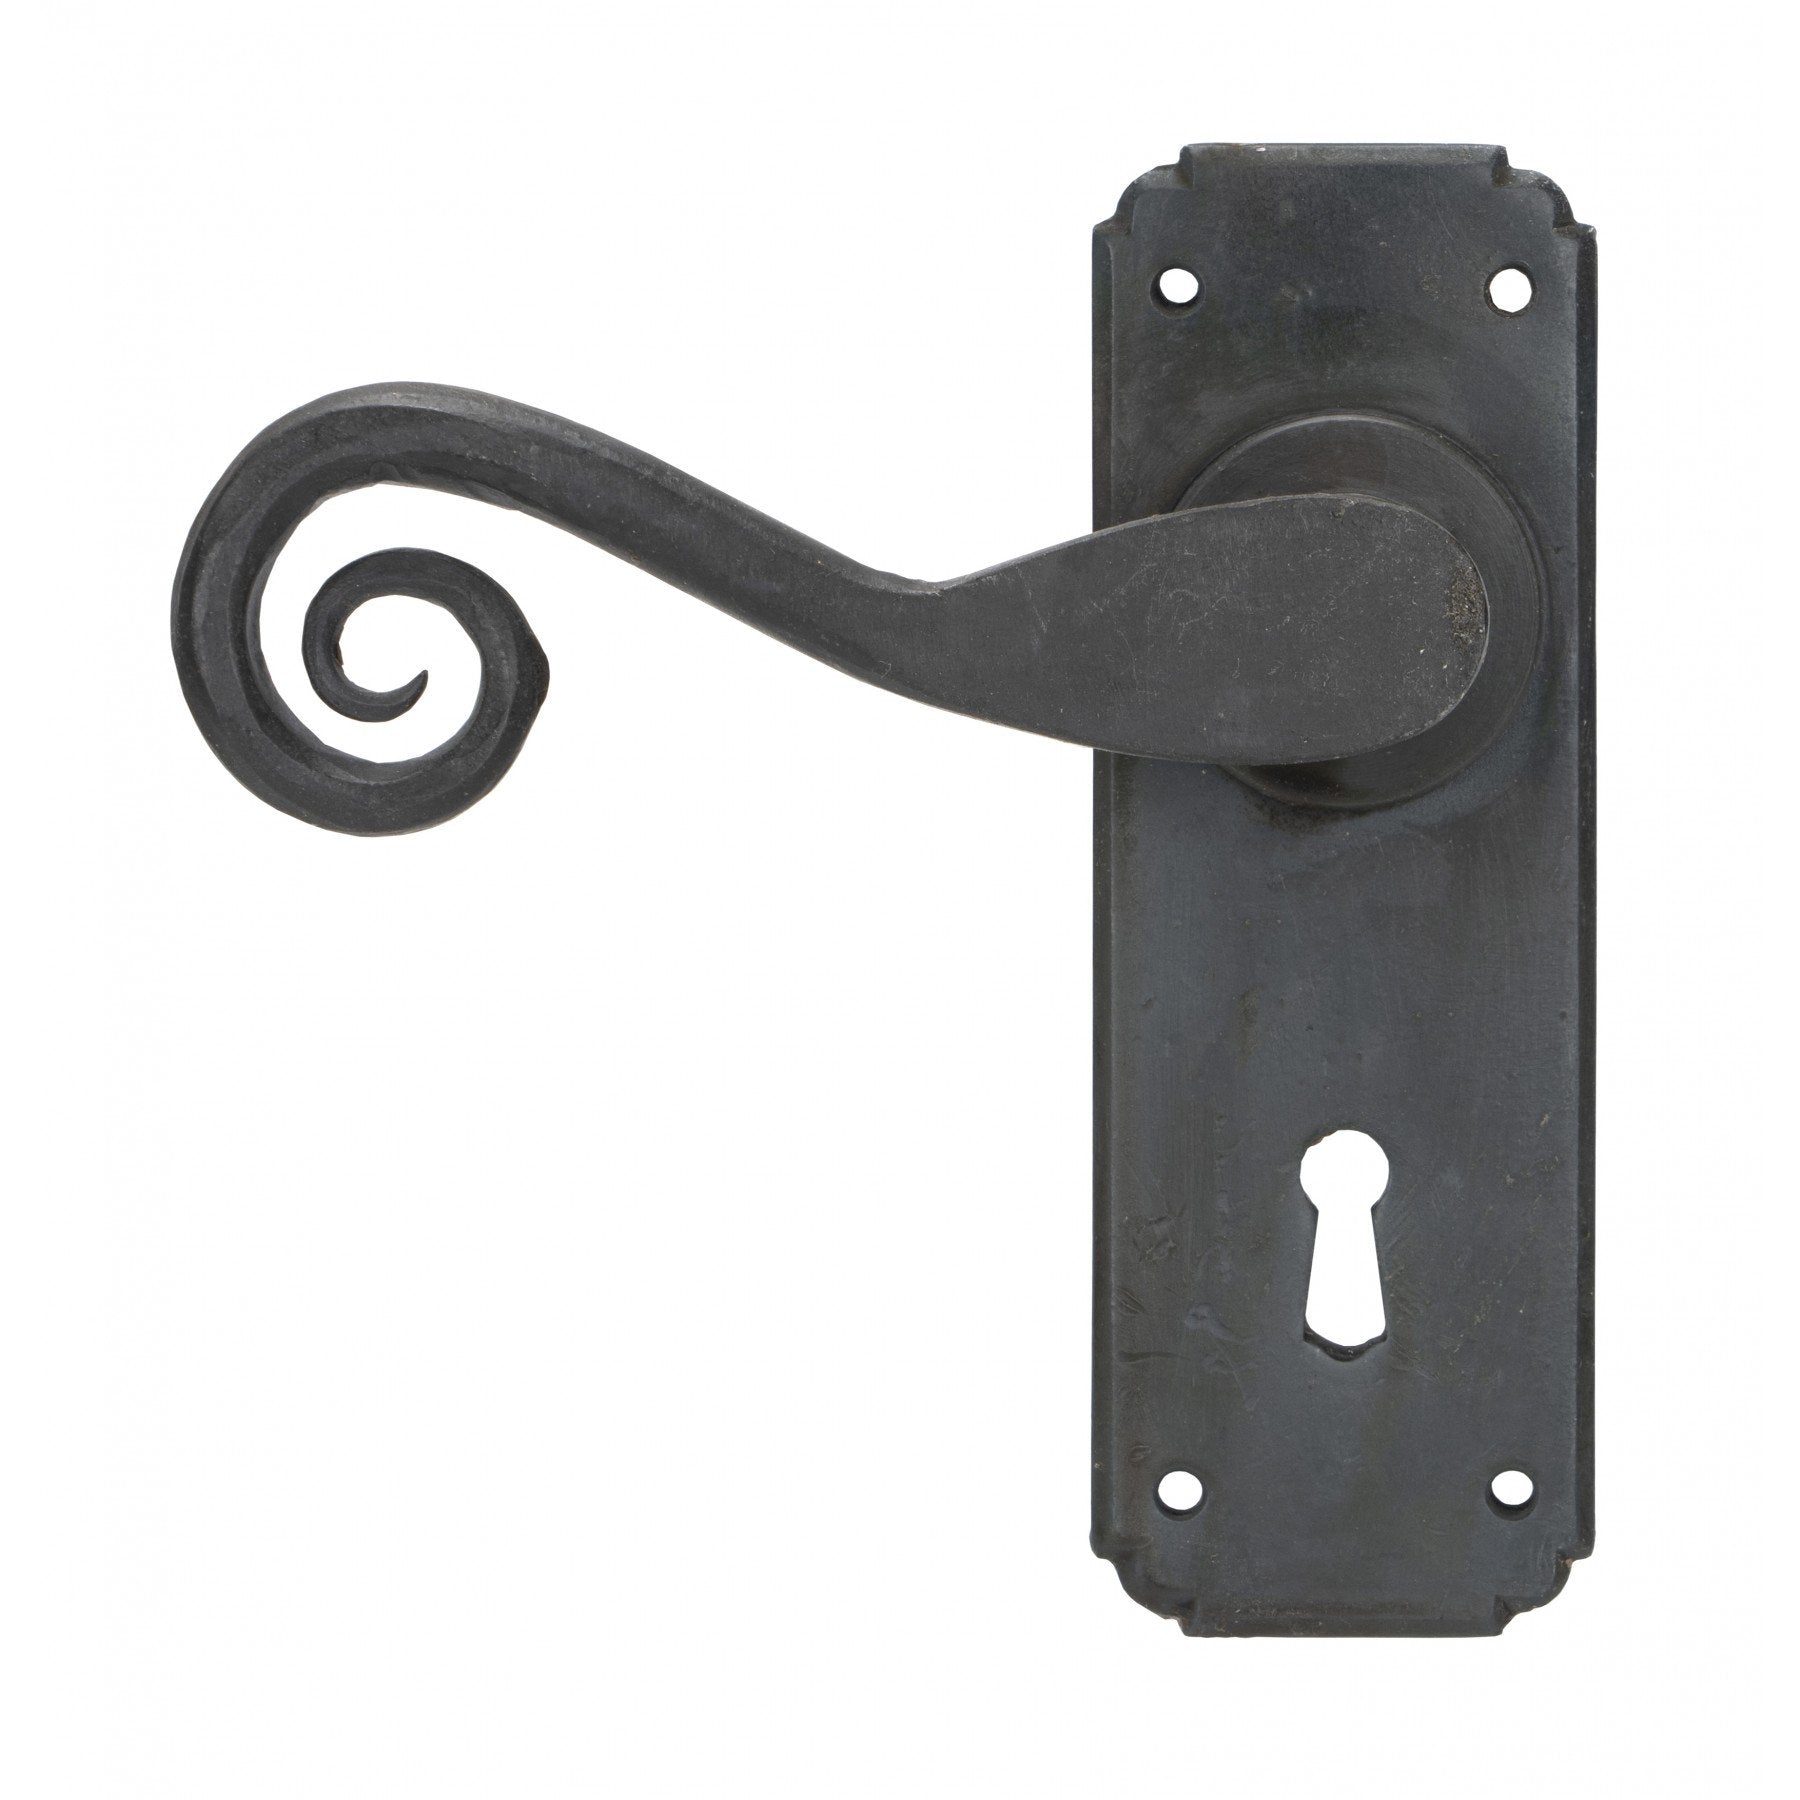 From the Anvil Beeswax Sprung Monkeytail Lever Lock Handle Set -